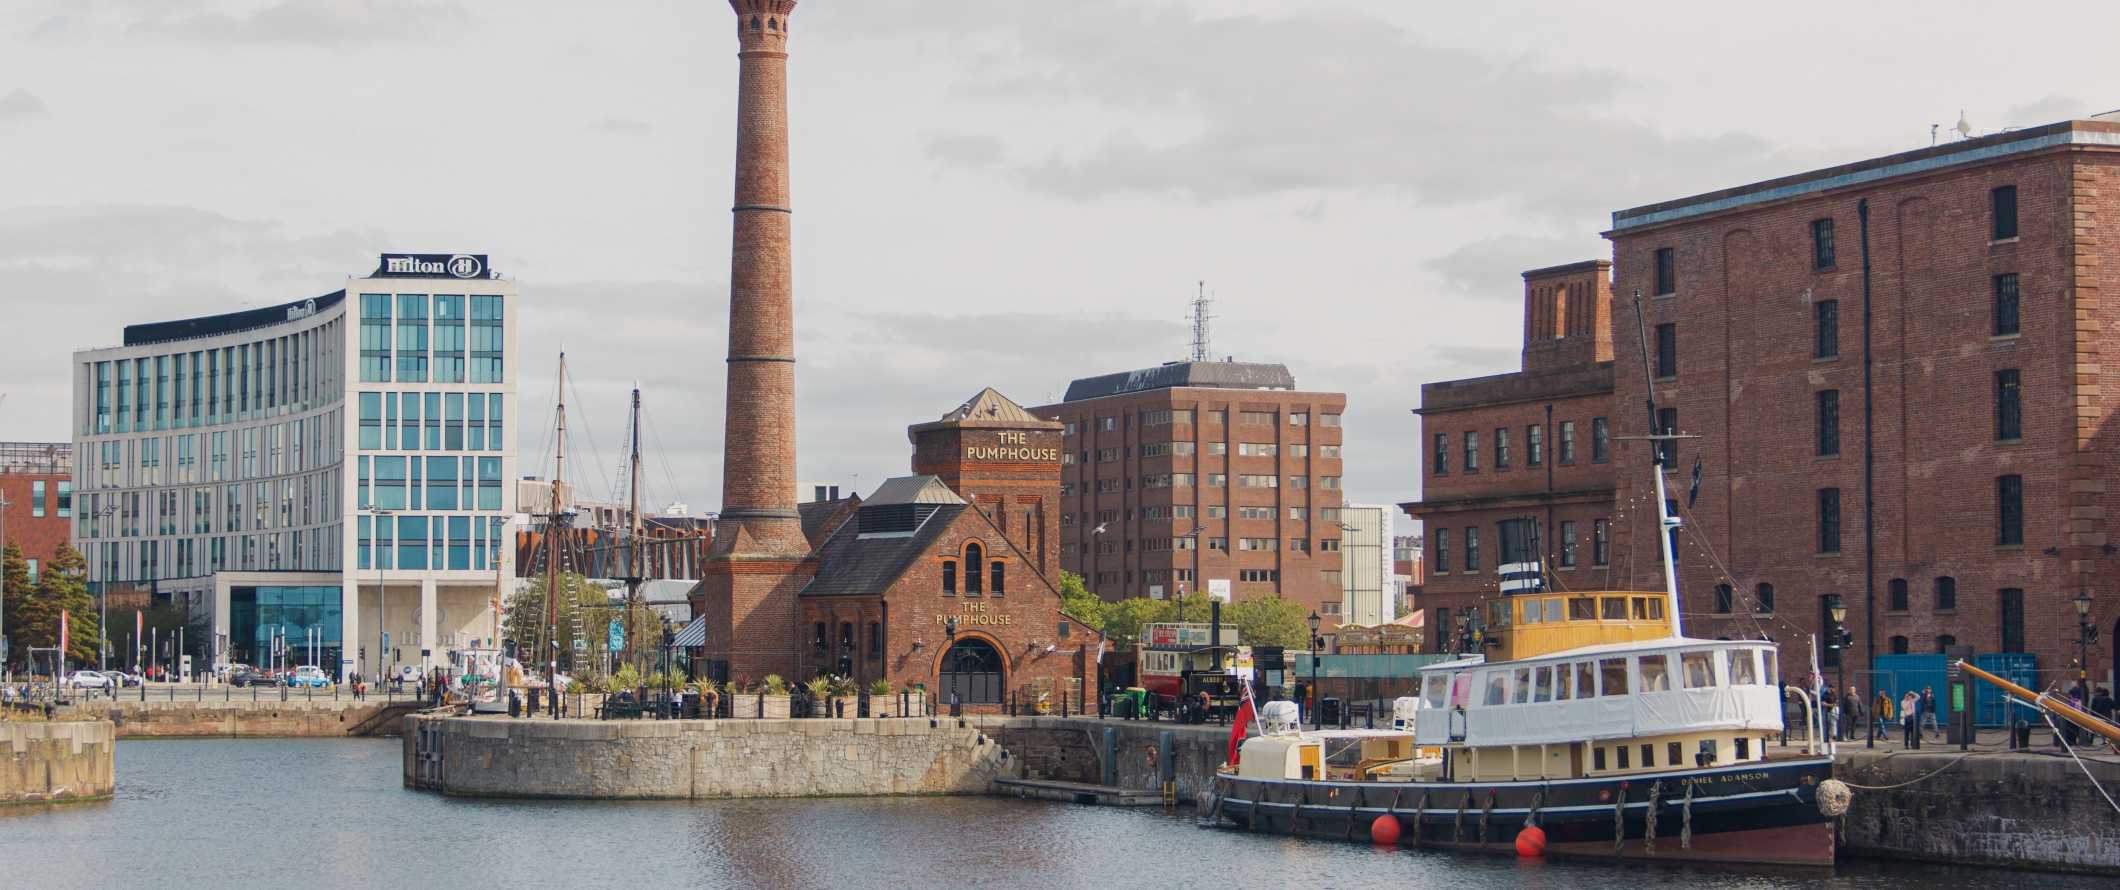 Historic boat, warehouses, and pumphouse at the Royal Albert Dock in Liverpool, England